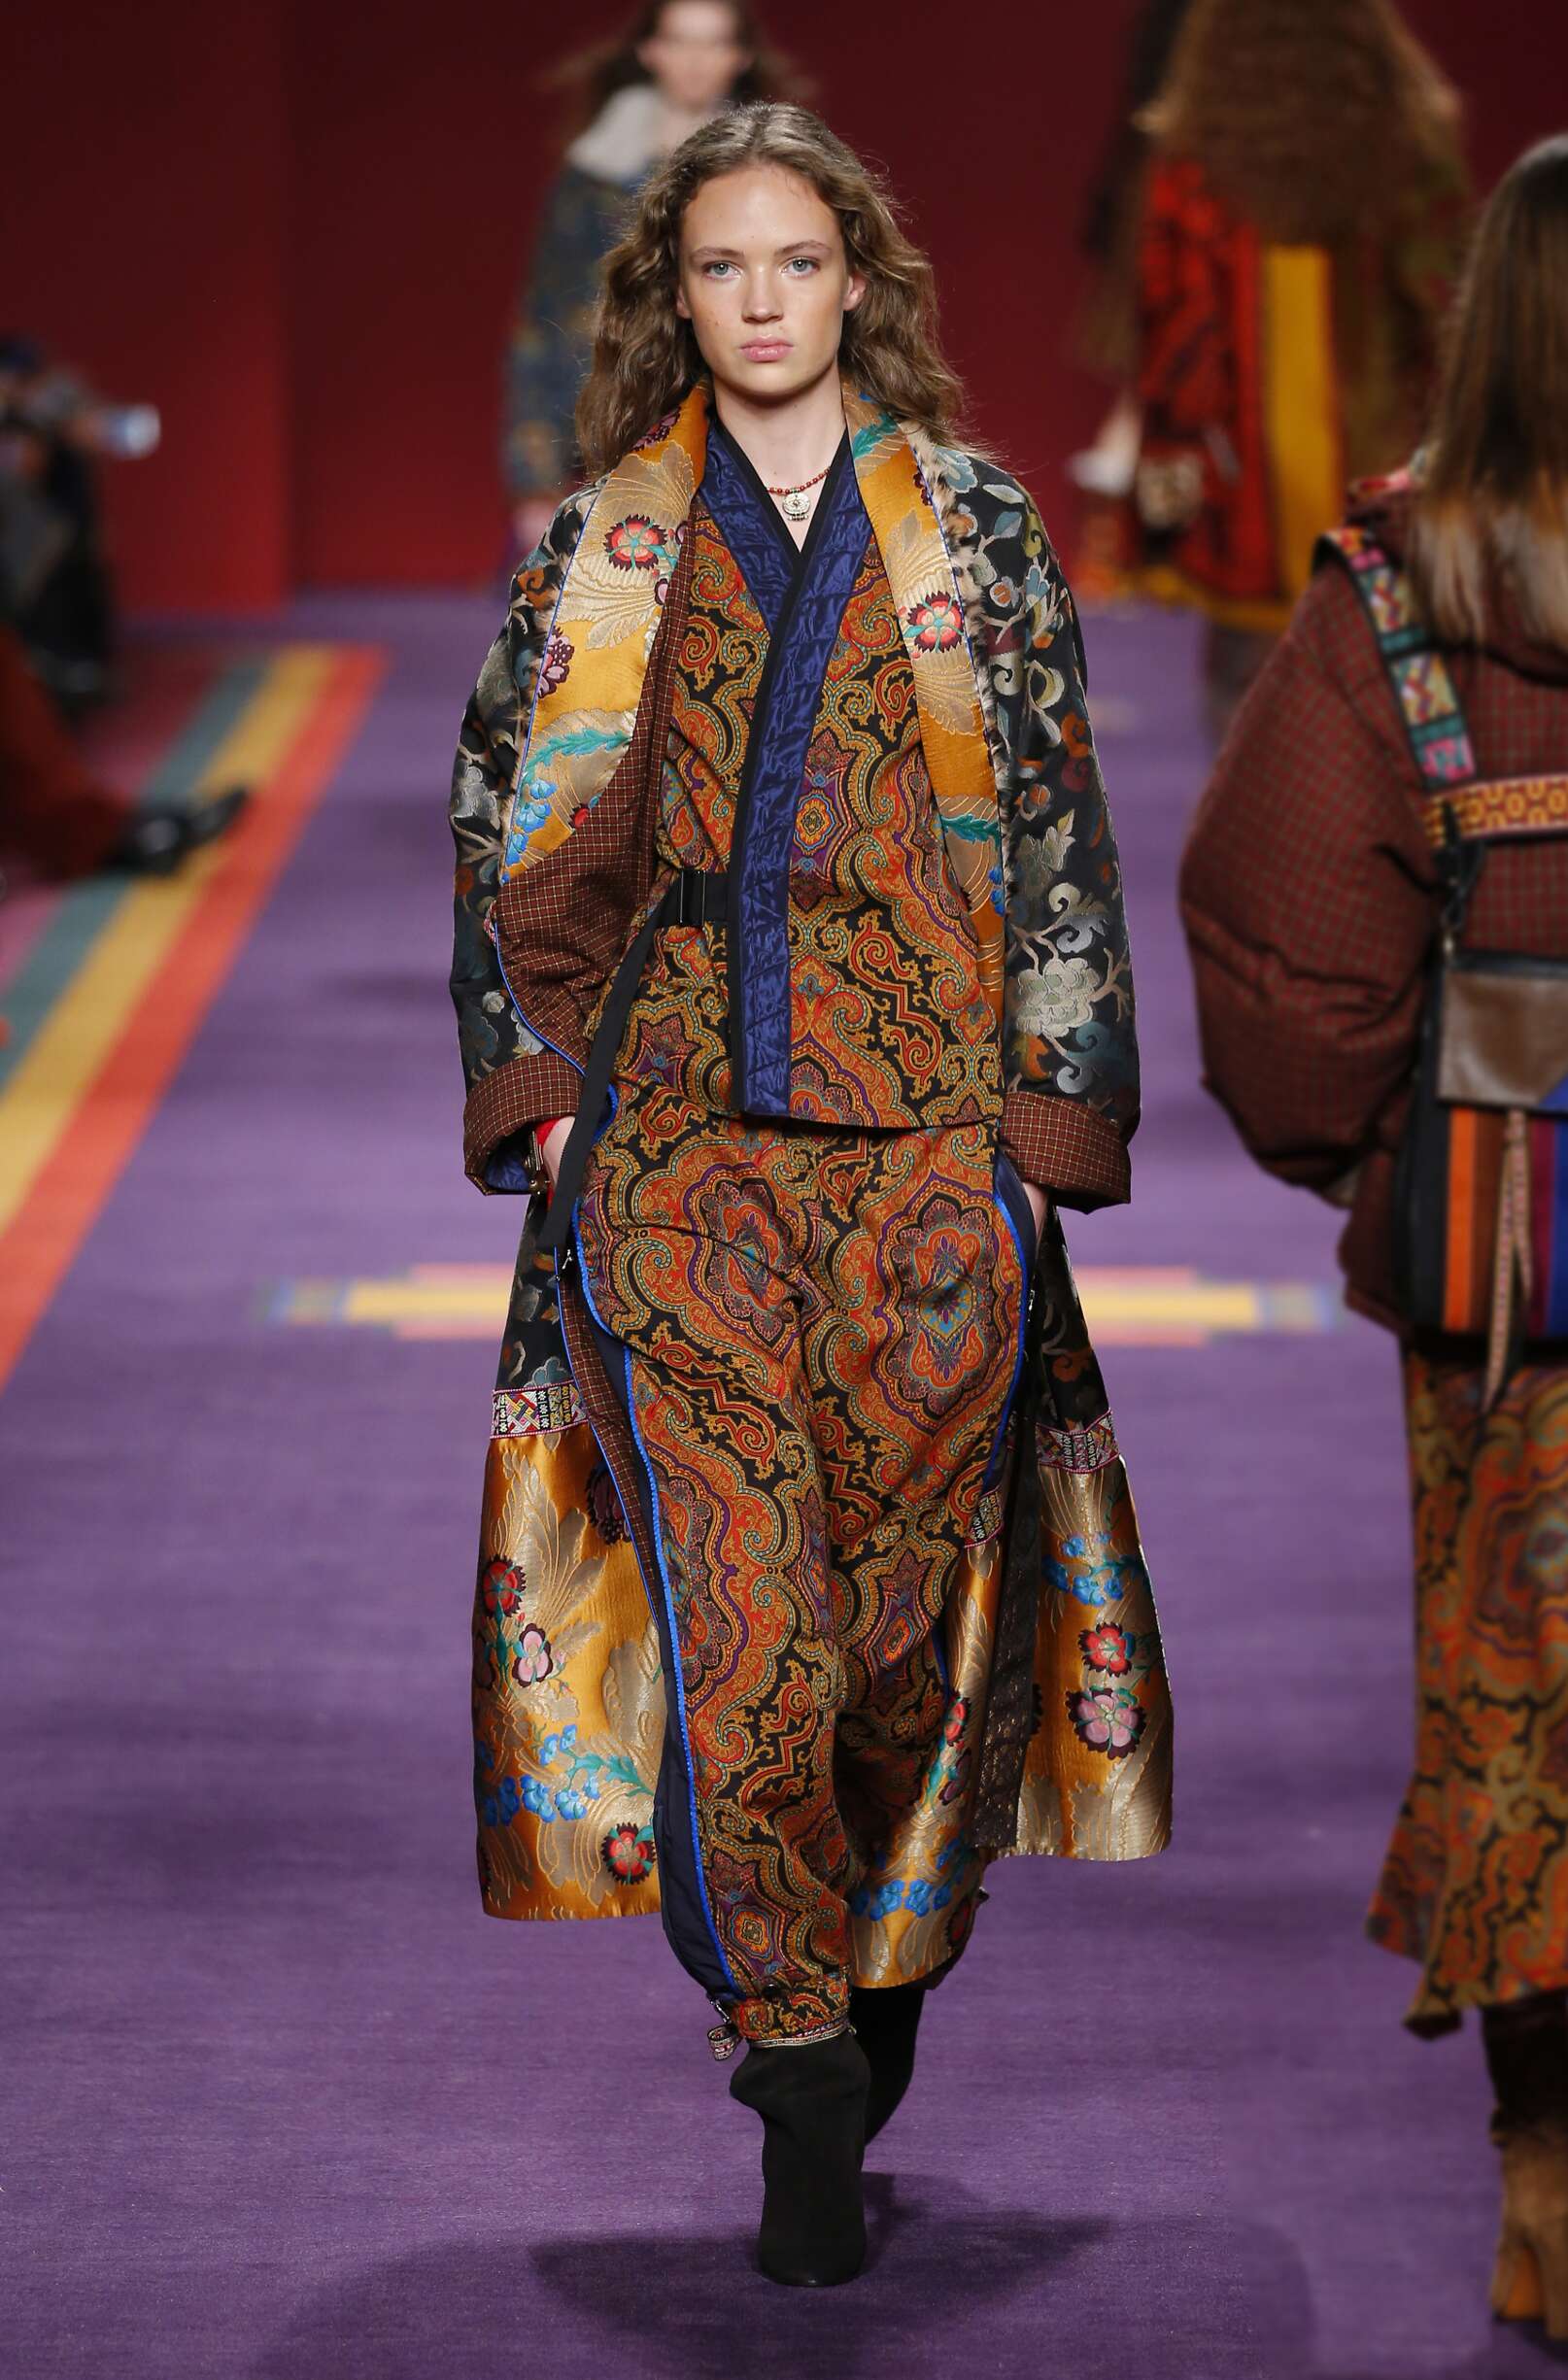 ETRO FALL WINTER 2017-18 WOMEN'S COLLECTION | The Skinny Beep